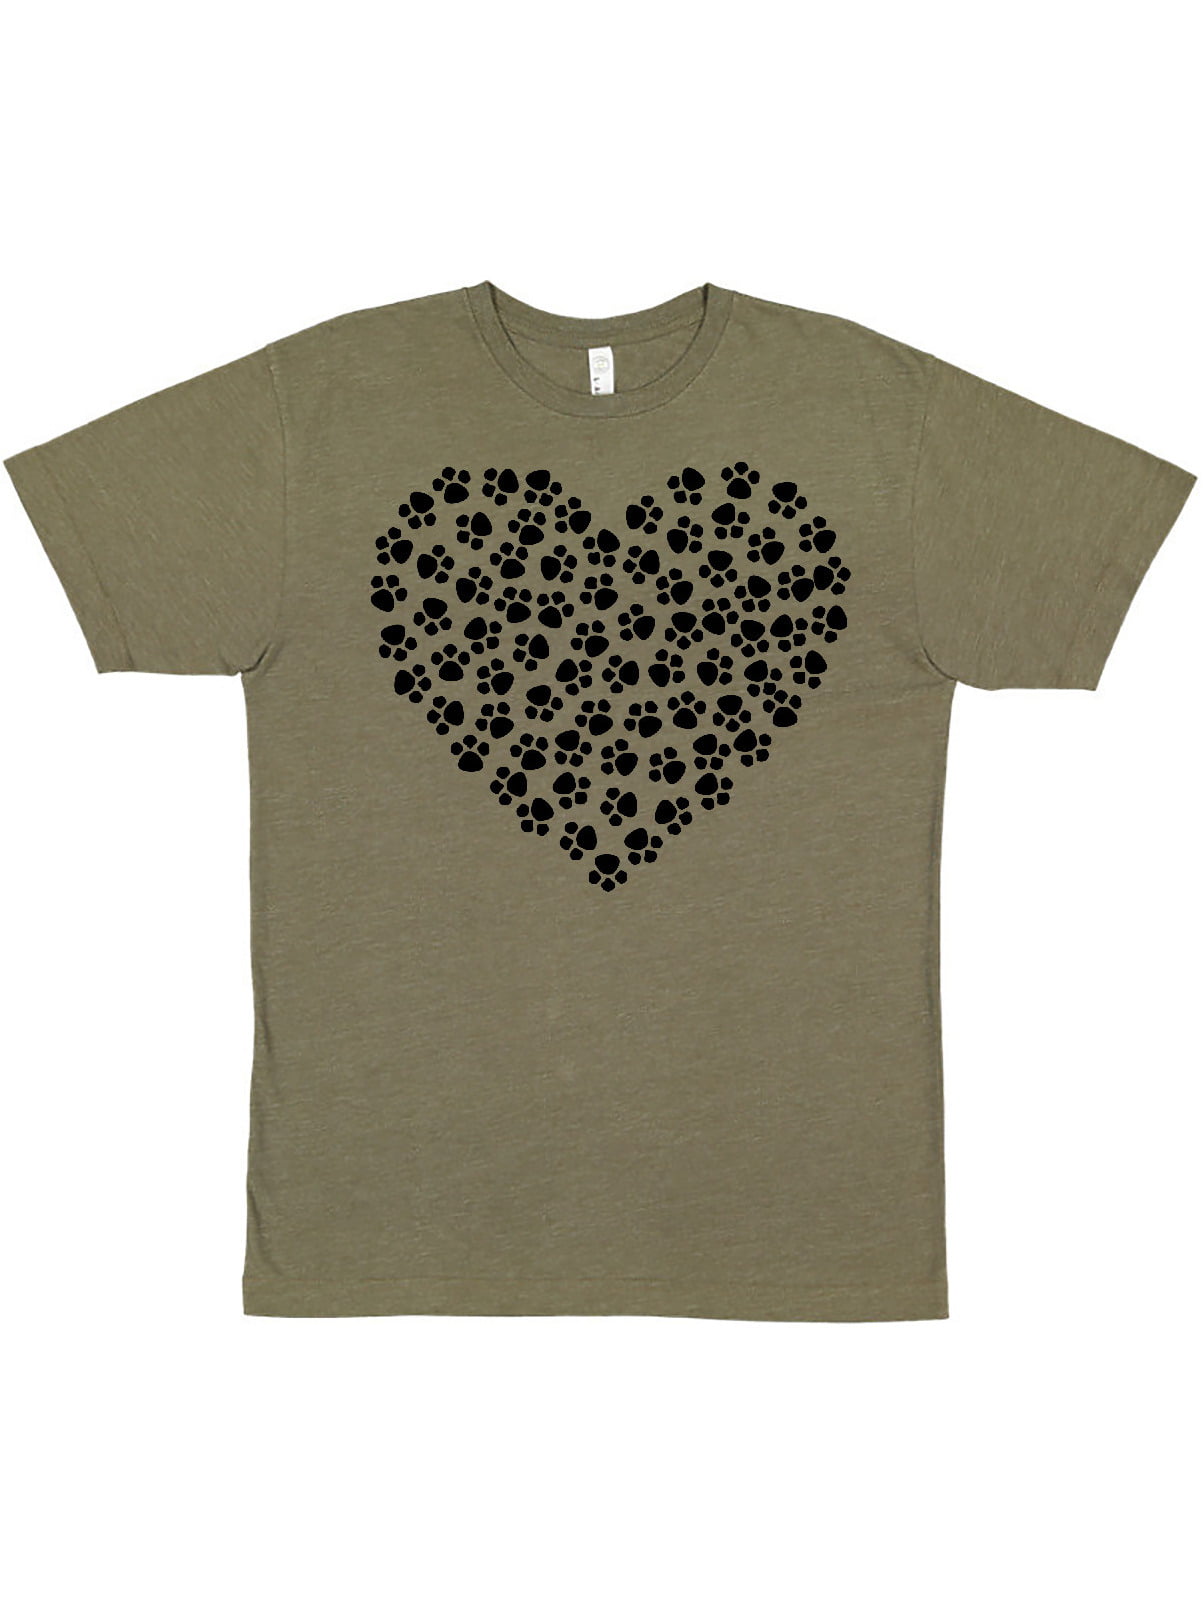 Parasit te lavendel Inktastic Heart Made Of Paws, Dog Paws, Puppy Paws - Black Adult T-Shirt  Male Military Green S - Walmart.com